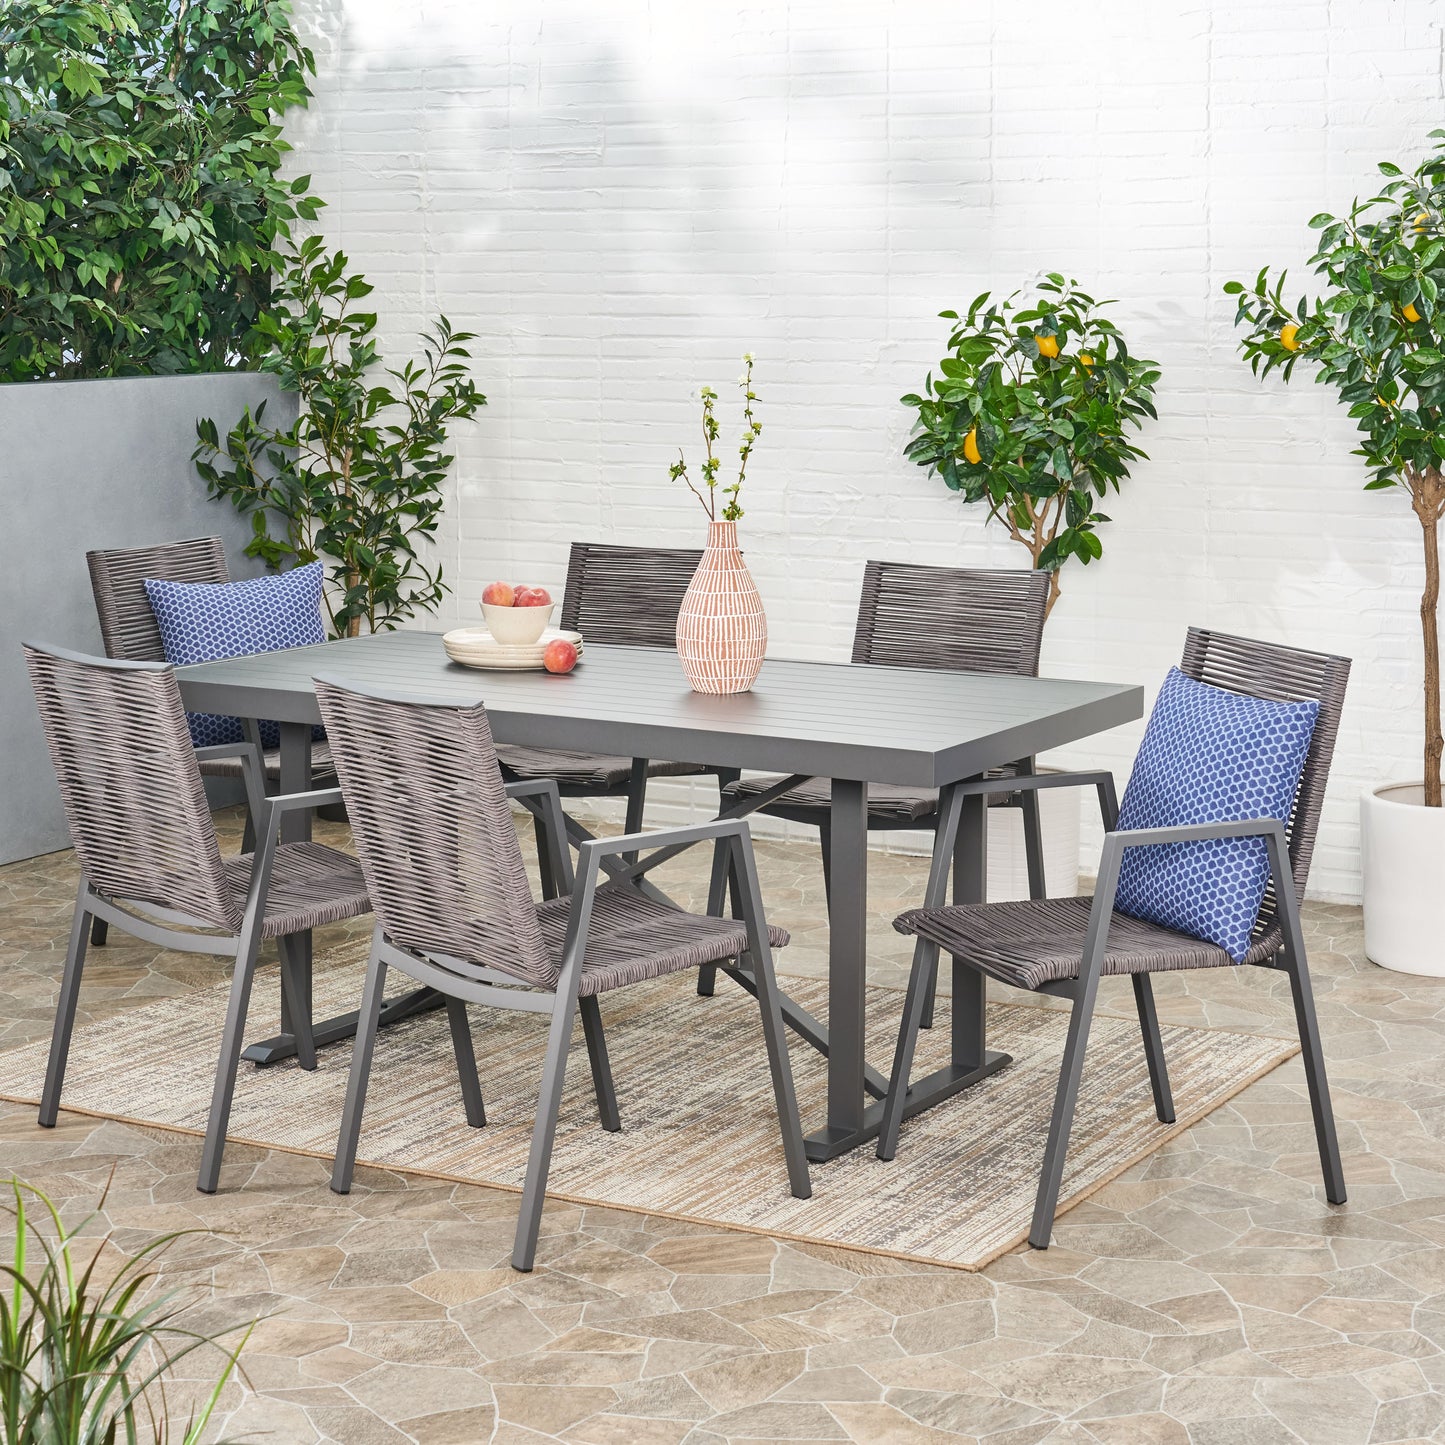 Hines Outdoor Modern Industrial Aluminum 7 Piece Dining Set with Rope Seating